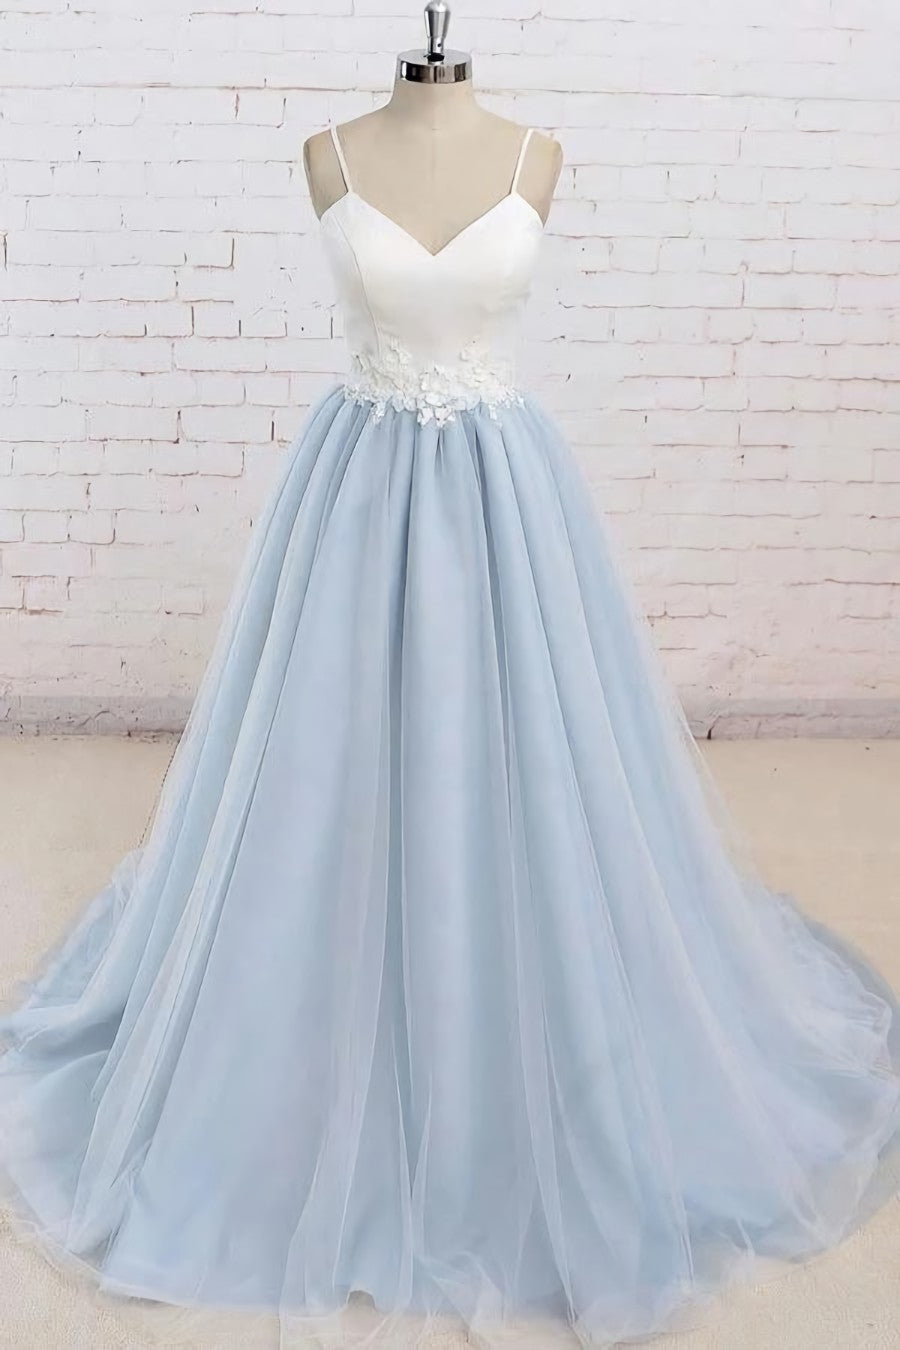 Prom Dresses For Short People, Light Blue Tulle Simple Spaghetti Straps Sweep Train Backless Prom Dress